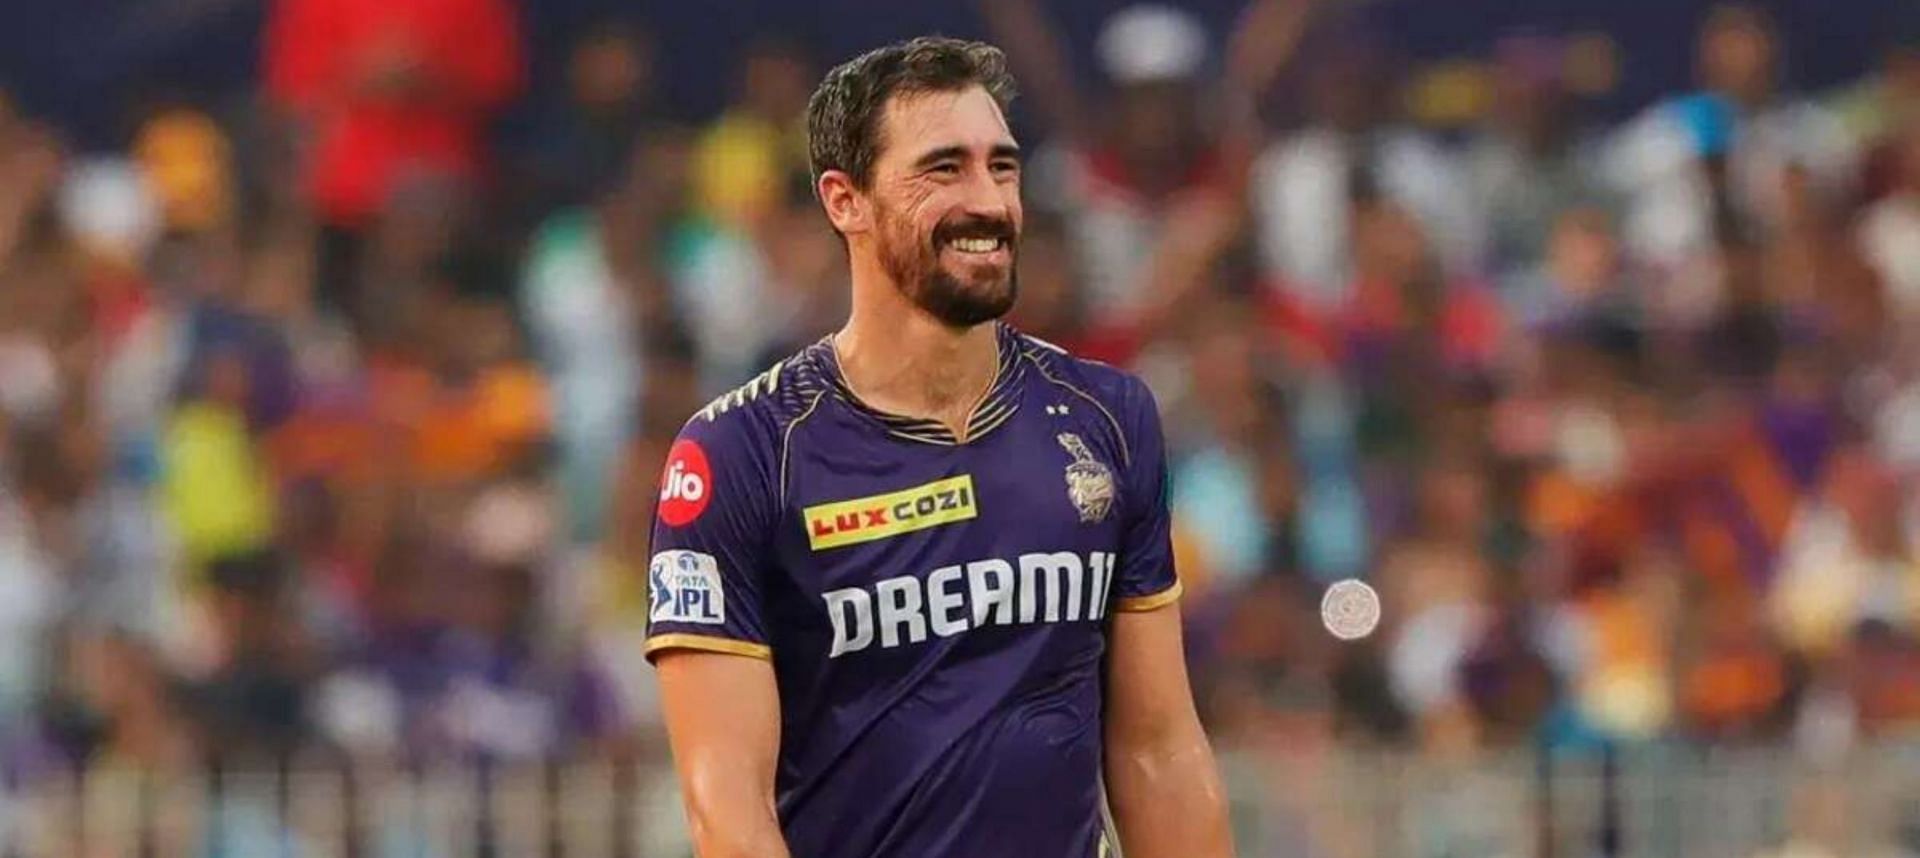 Twitter went berserk as KKR pacer Mitchell Starc produced a sensational spell of 3-28 in four overs against LSG at the Eden Gardens